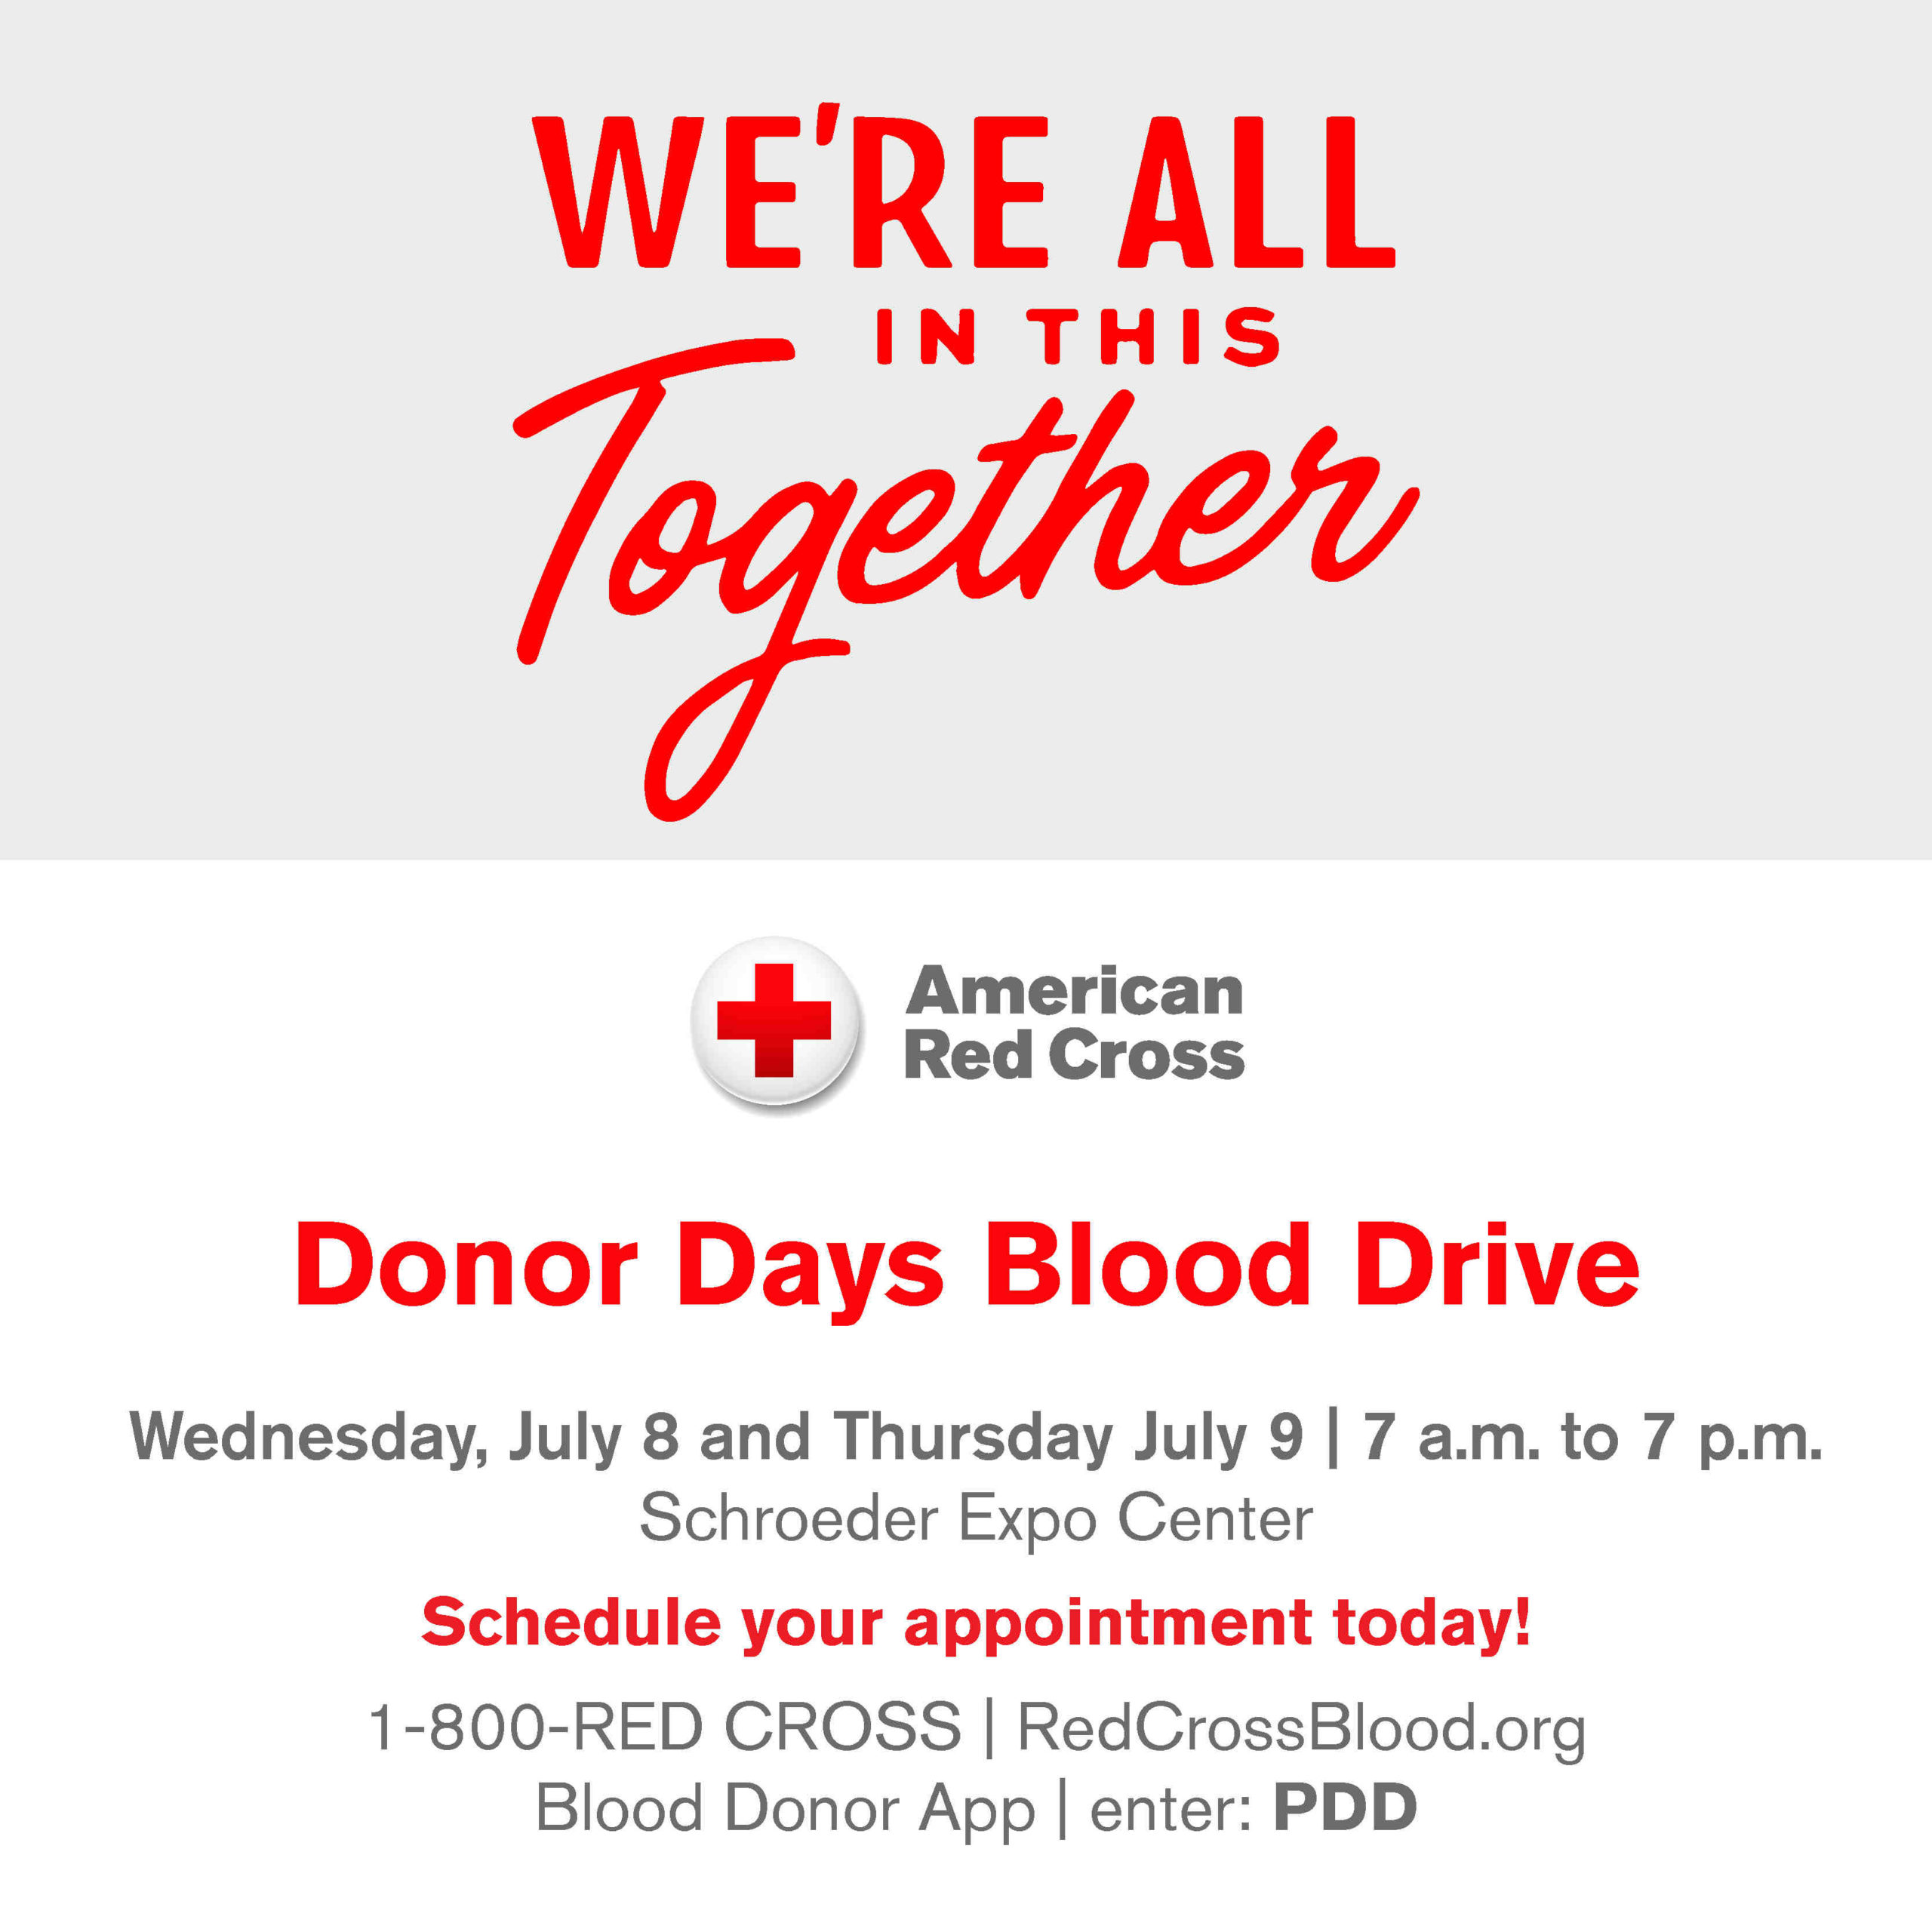 Donate blood in Encinitas and receive a gift voucher: Red Cross